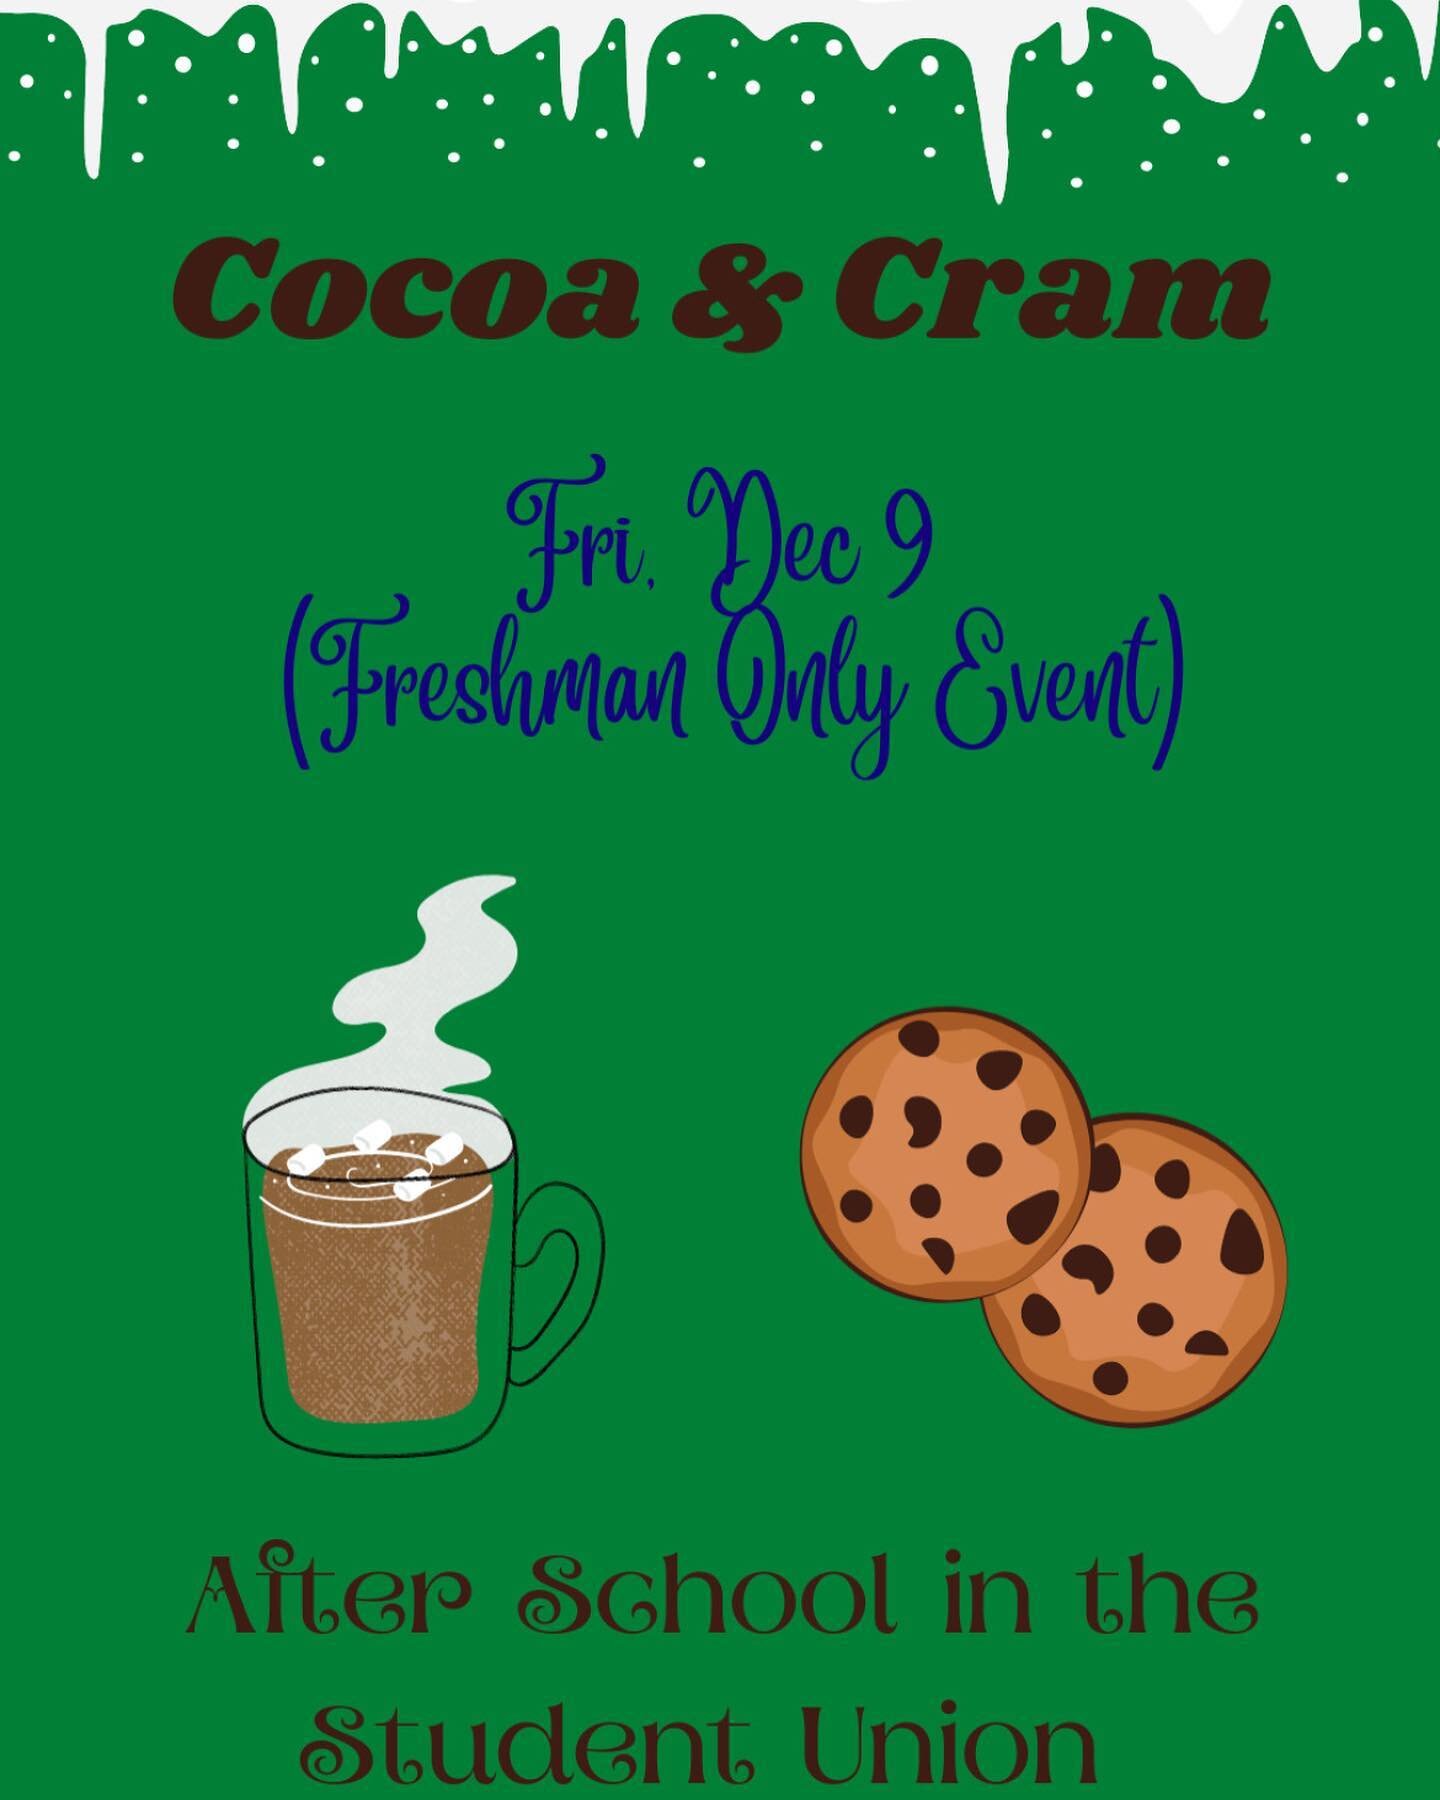 FRESHMAN!!! We want to see you tomorrow after school ☕️🍪❄️📚 #classof2026